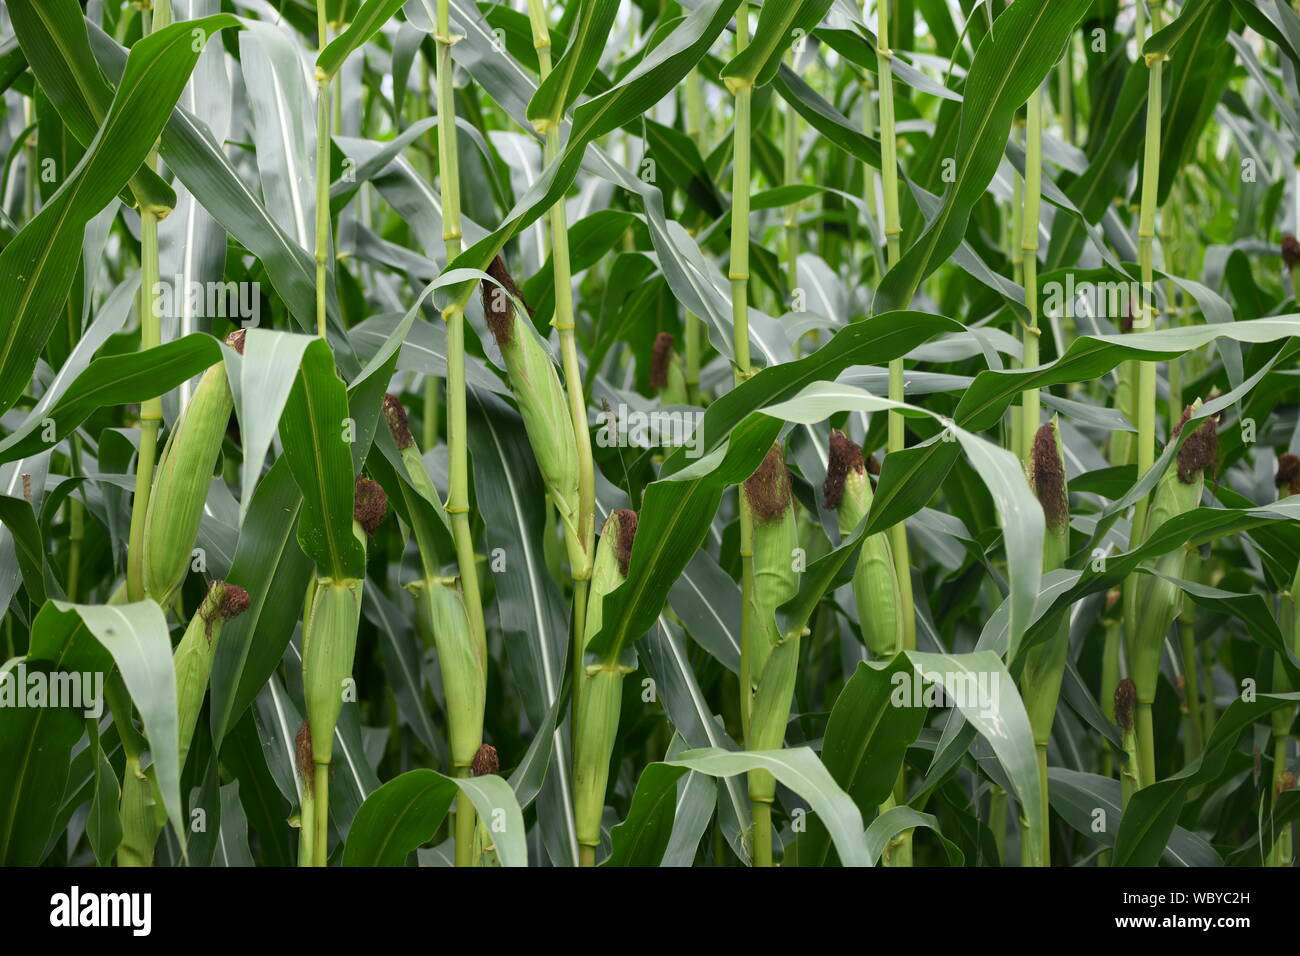 cultivating corn Stock Photo